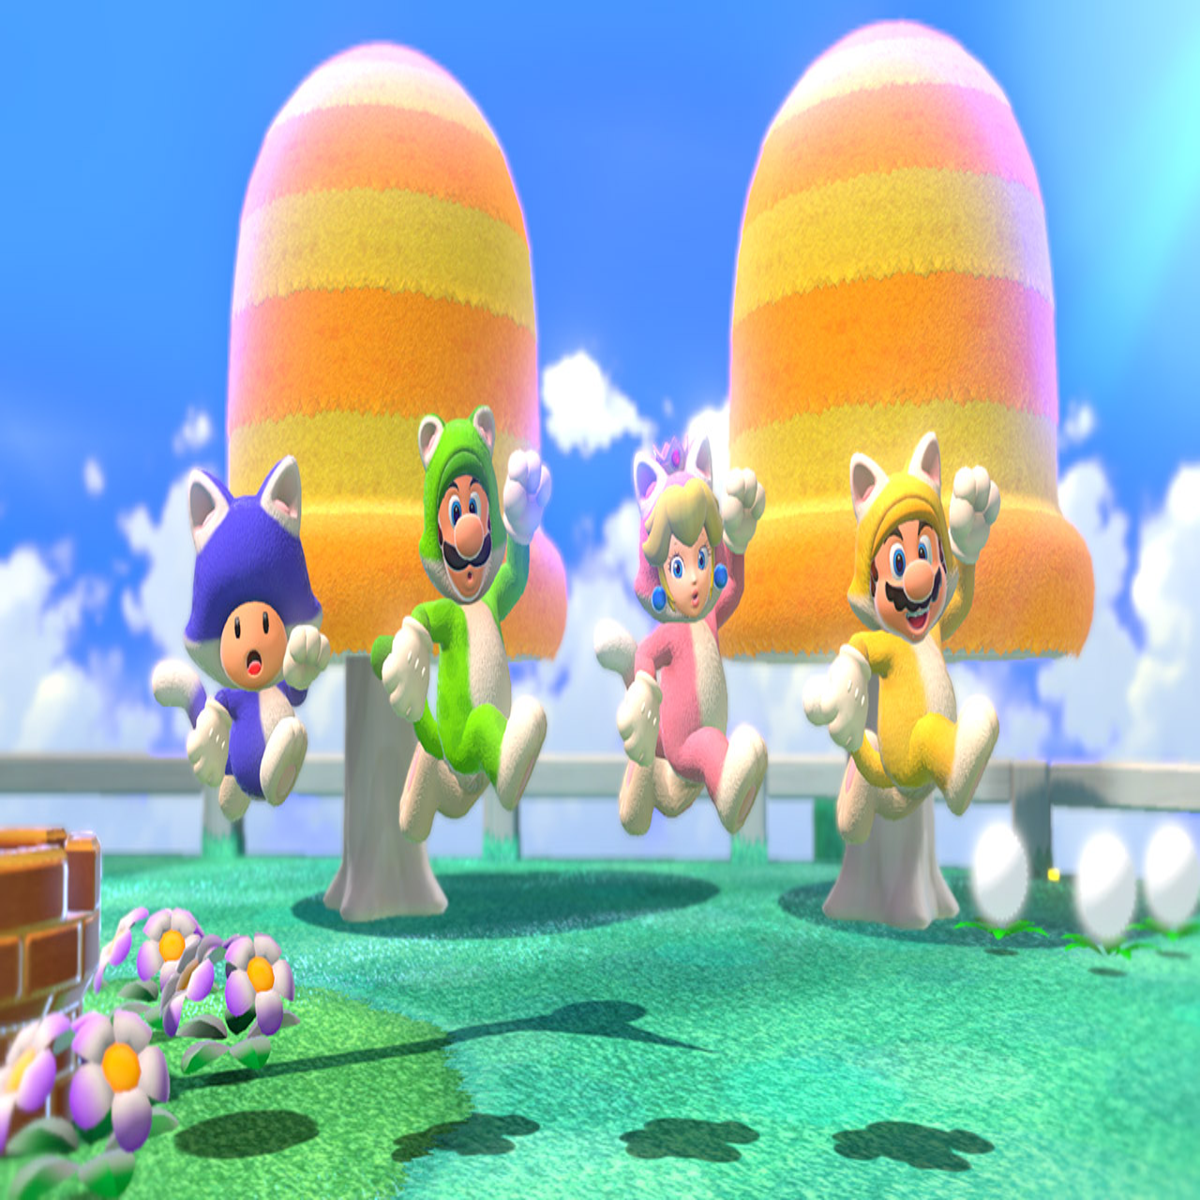 Bowser's Fury Makes Super Mario 3D World a Great Nintendo Game